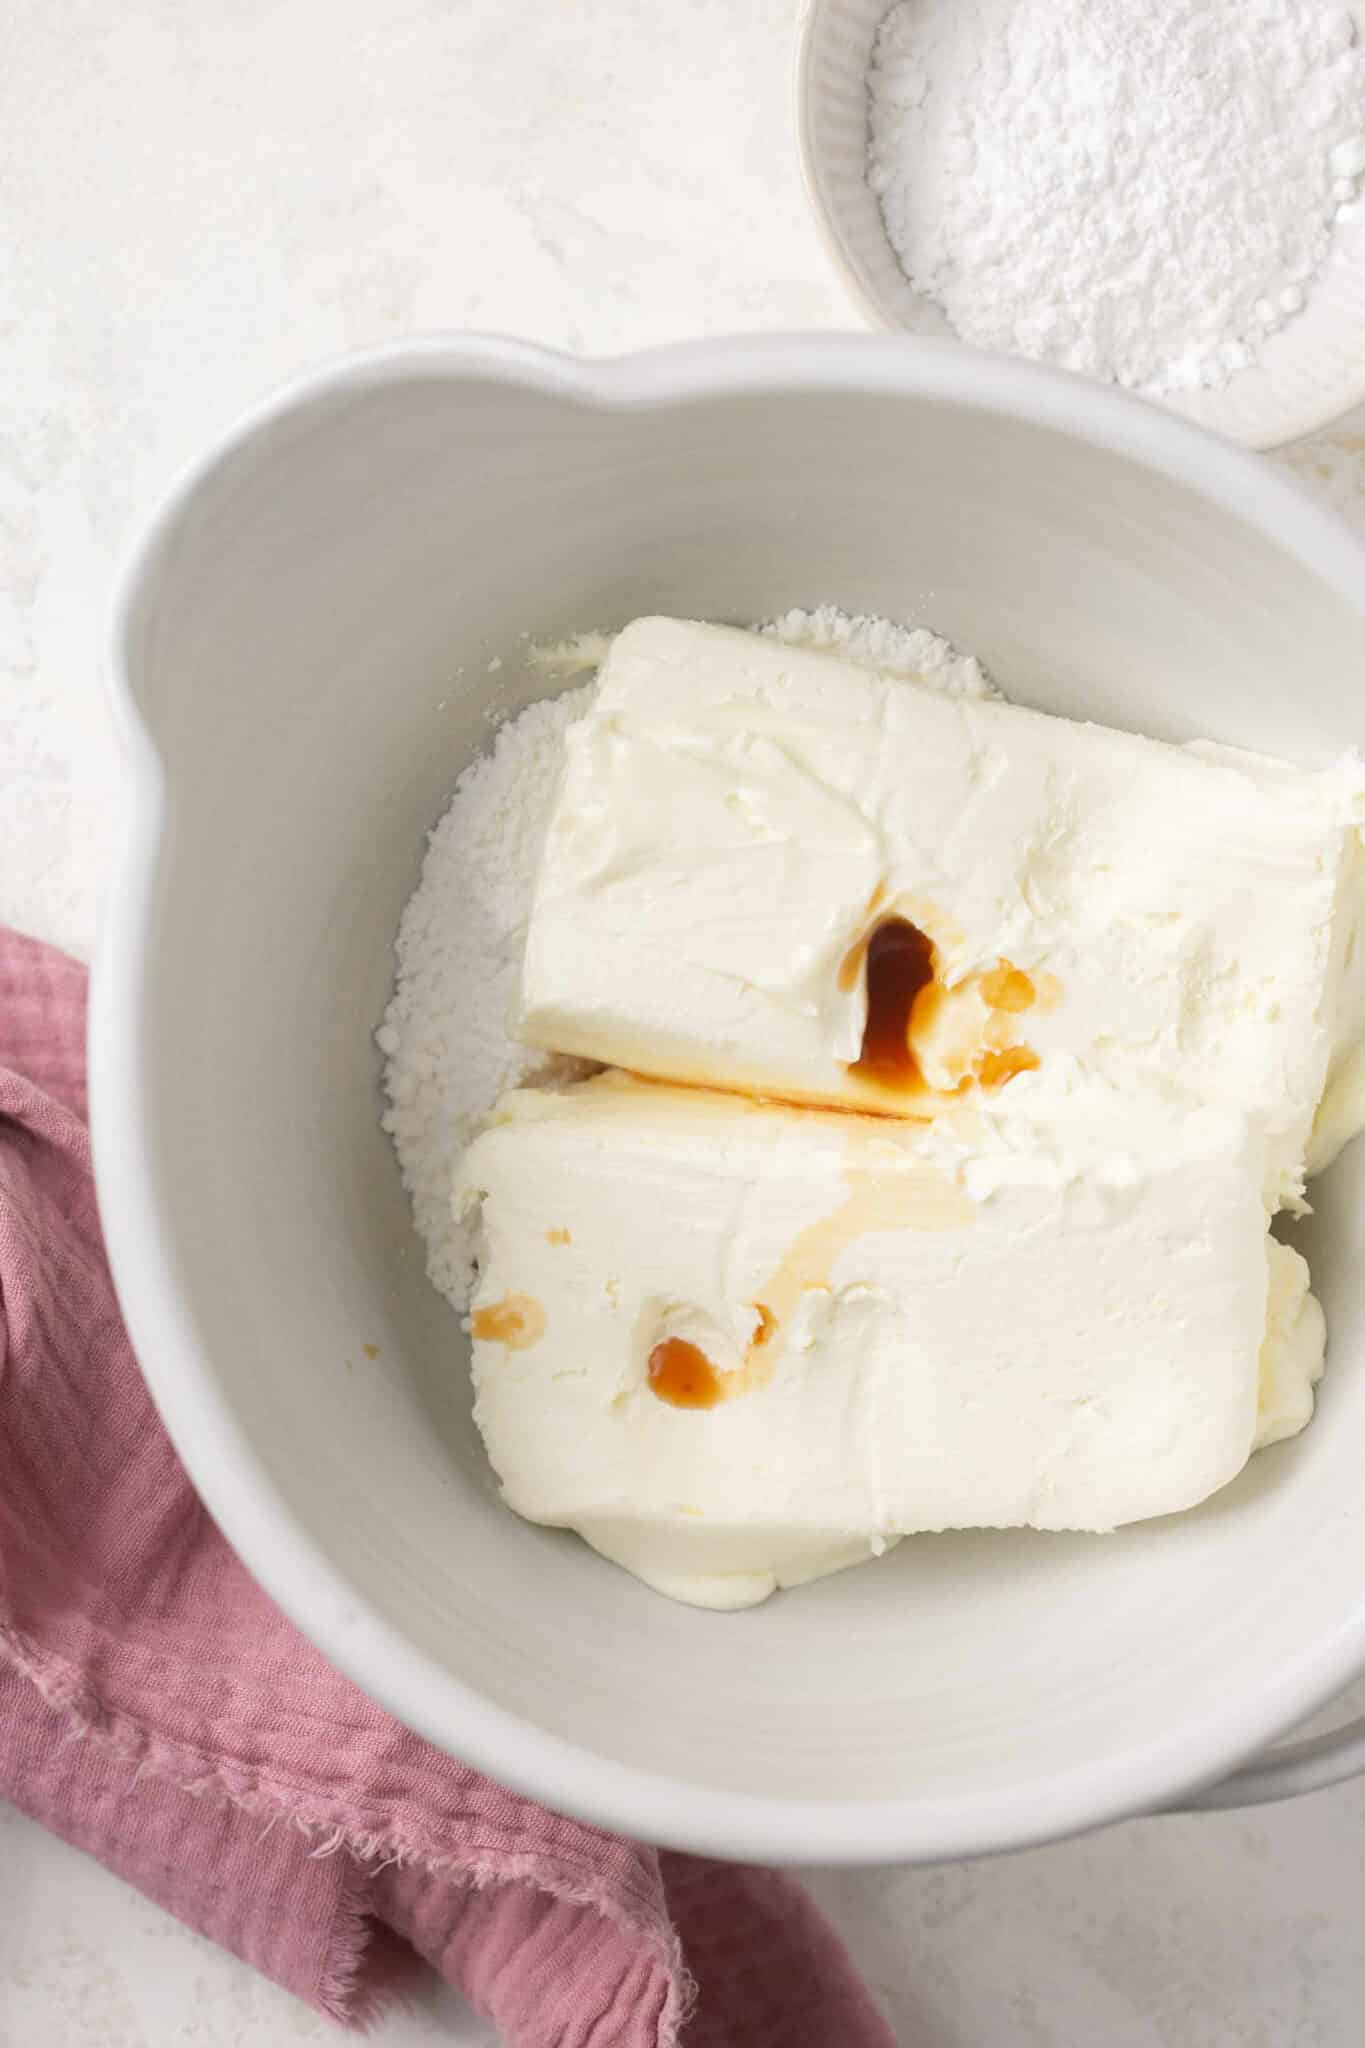 Cream cheese and vanilla in a bowl.